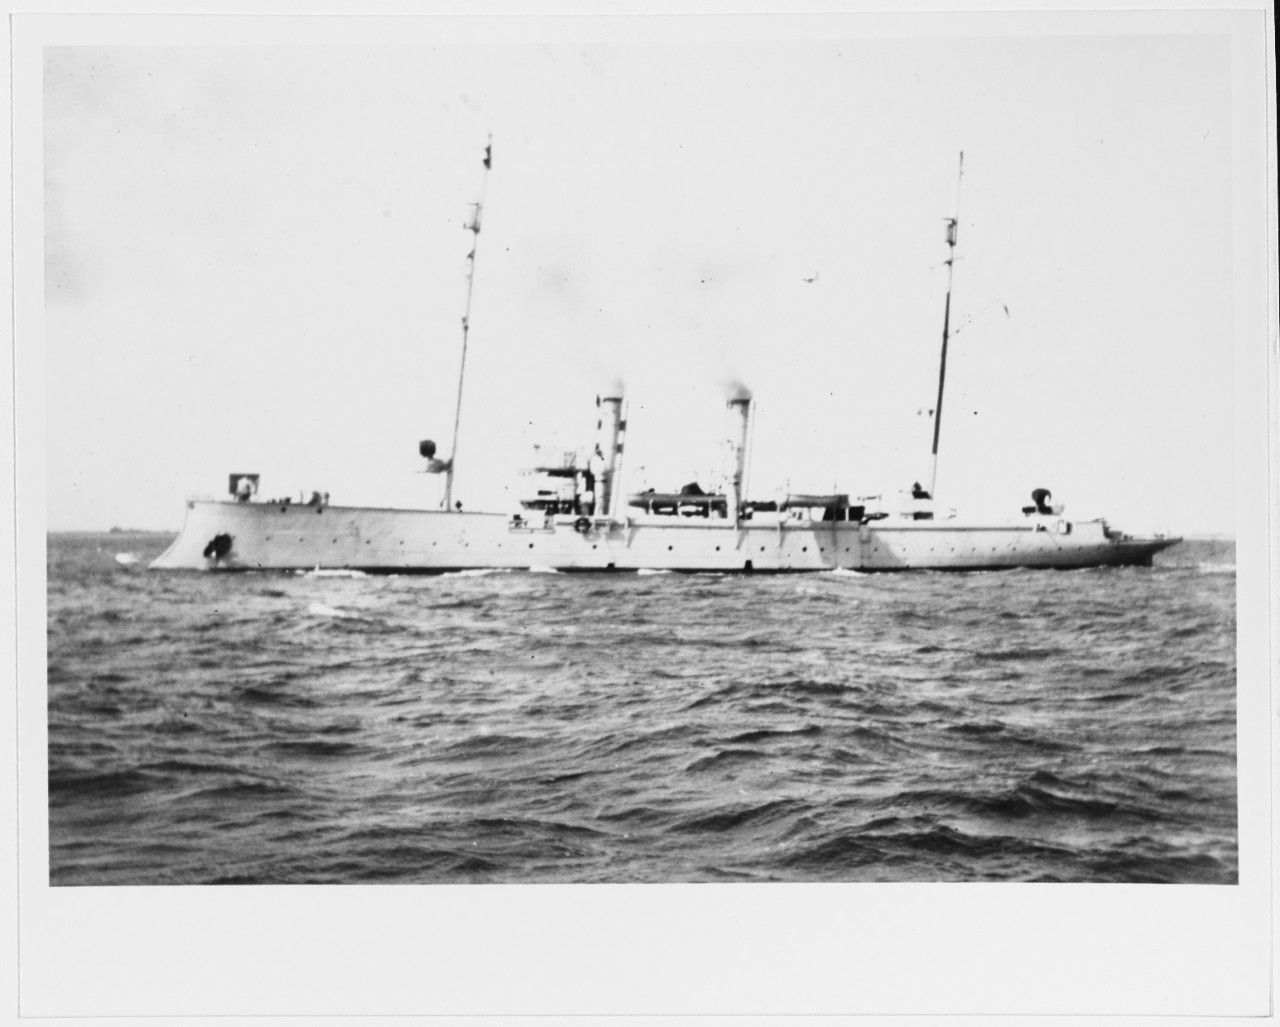 German Blitz-class small cruiser at sea in about 1914